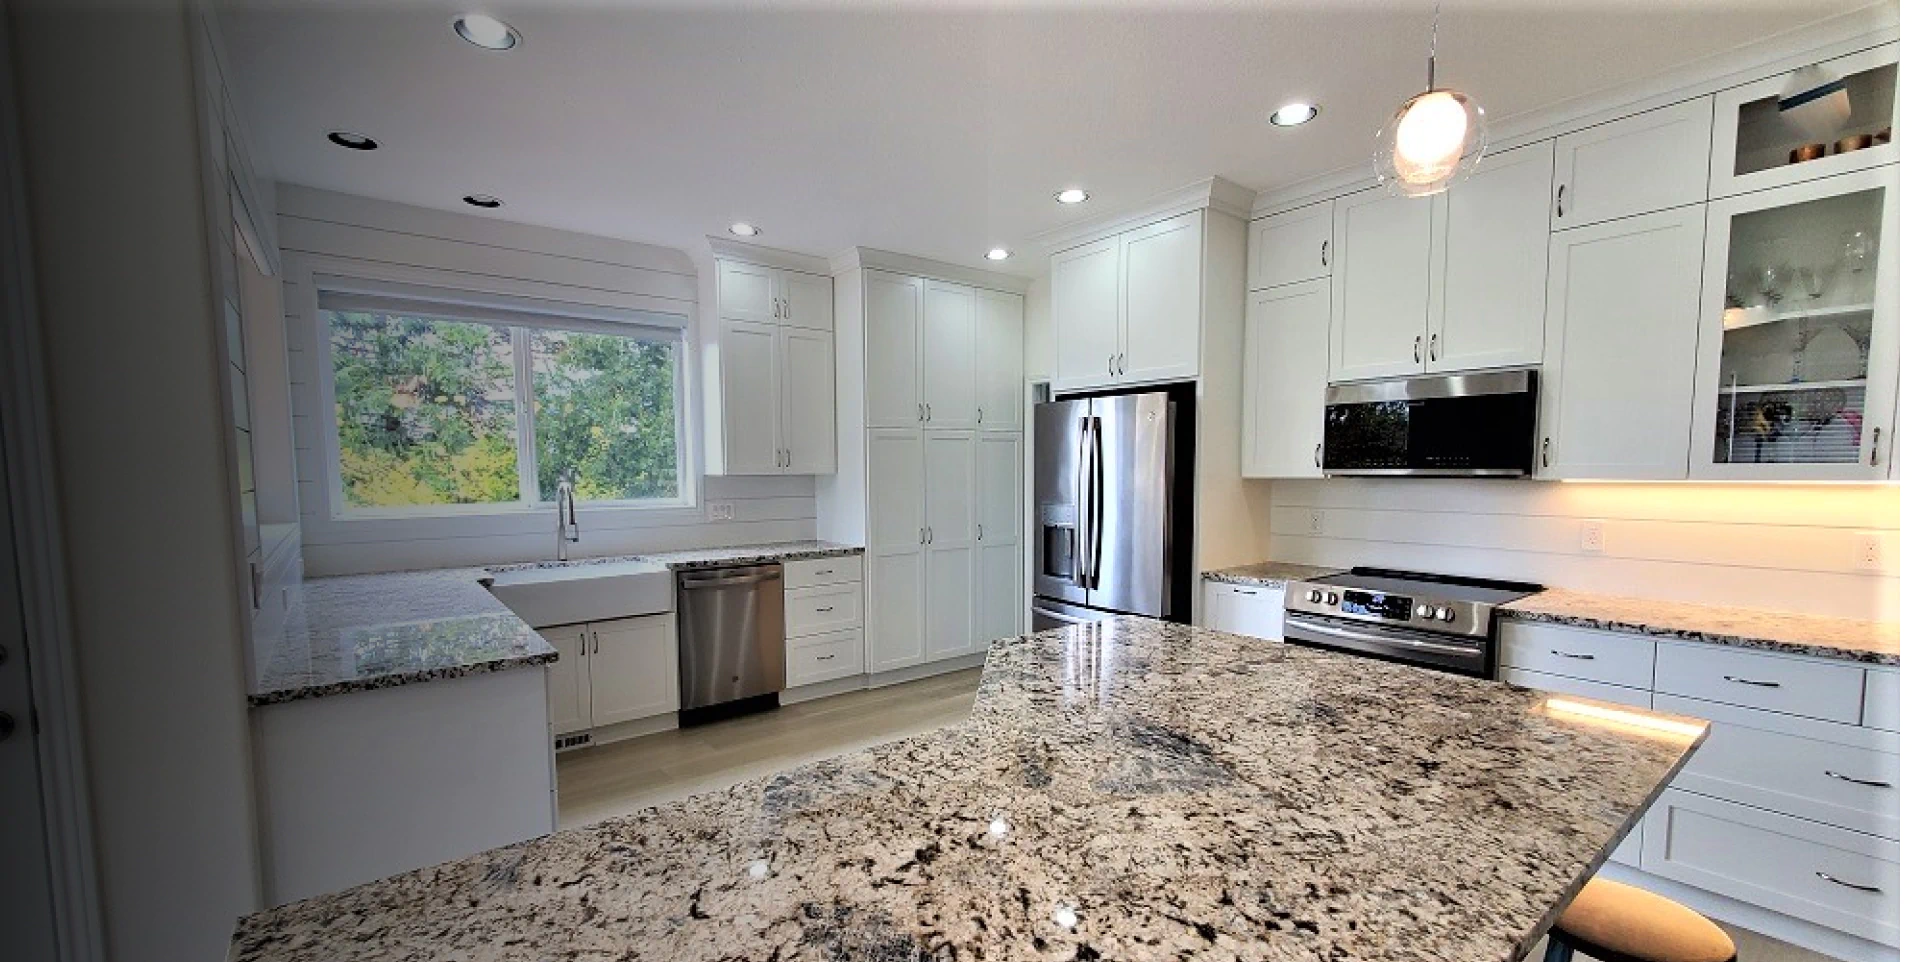 newly remodeled kitchen with marble countertop